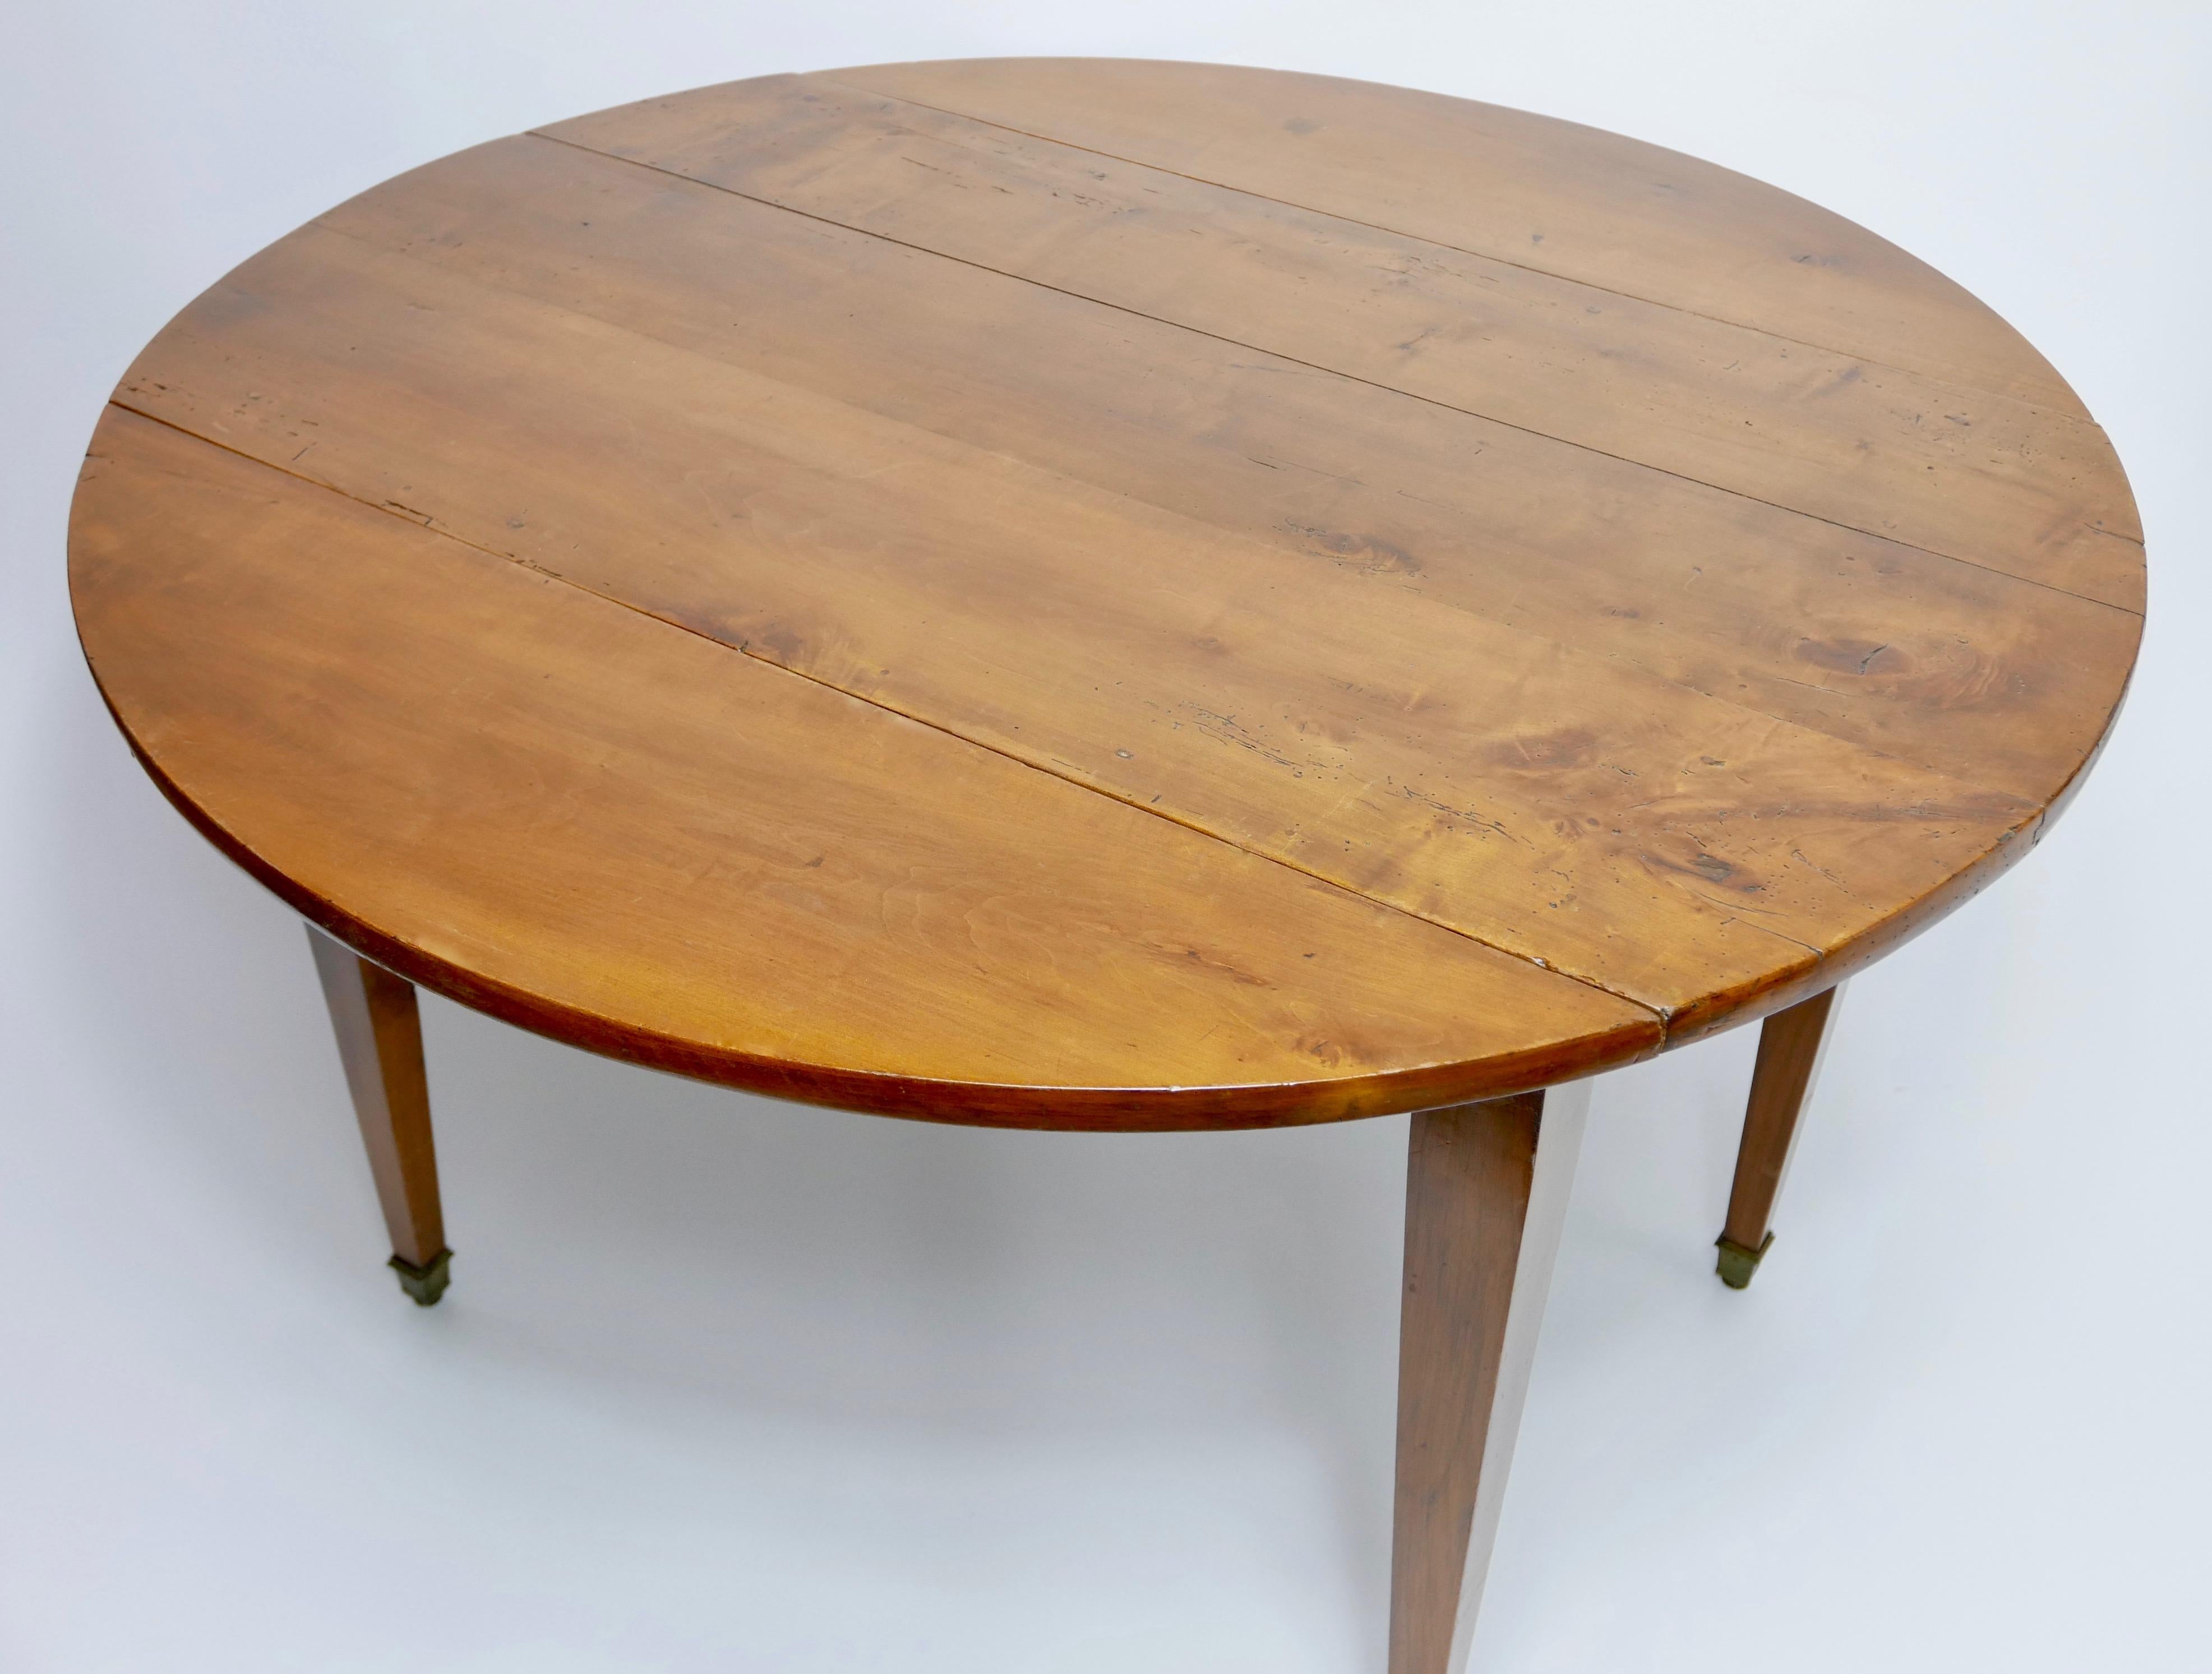 French Provincial solid cherrywood drop-leaf table with square tapering legs terminating with brass sabots. The 1